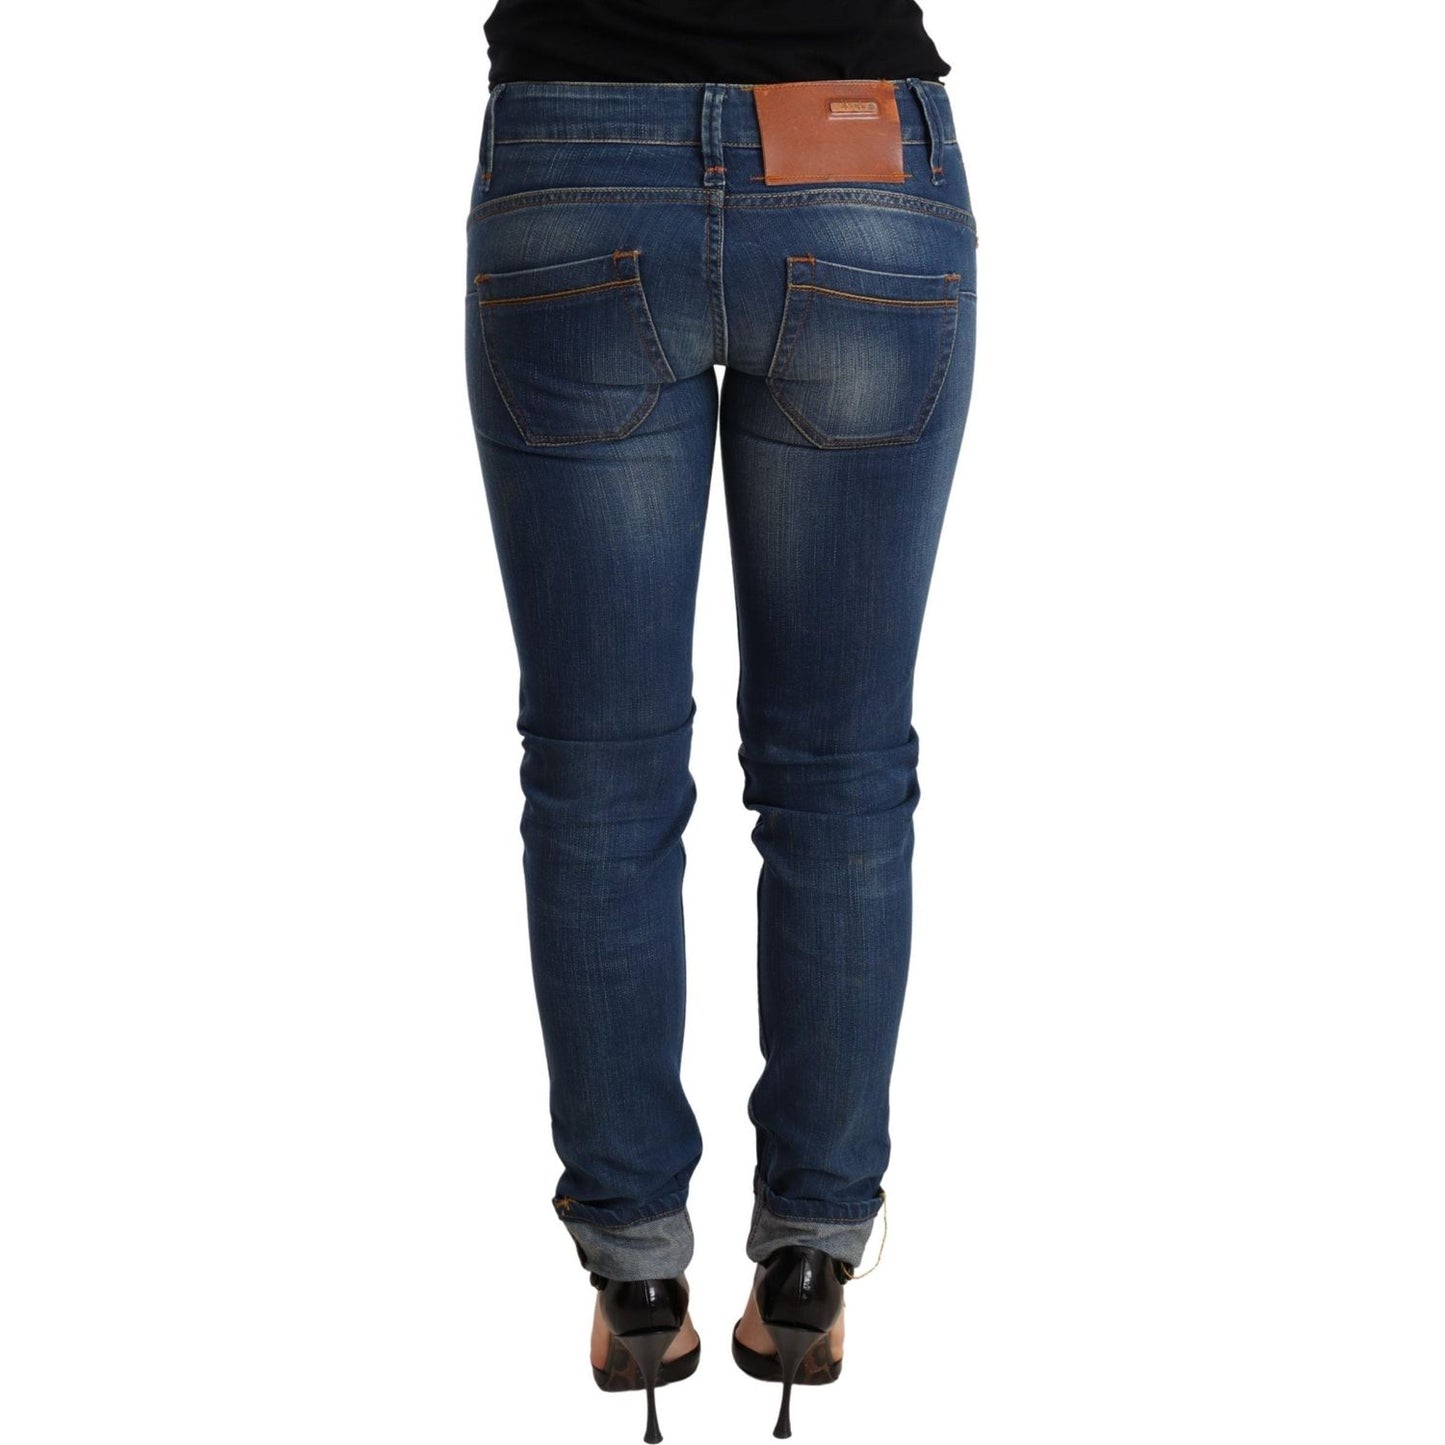 Acht Chic Blue Washed Push-Up Skinny Jeans Jeans & Pants blue-washed-low-waist-skinny-denim-jeans-pant